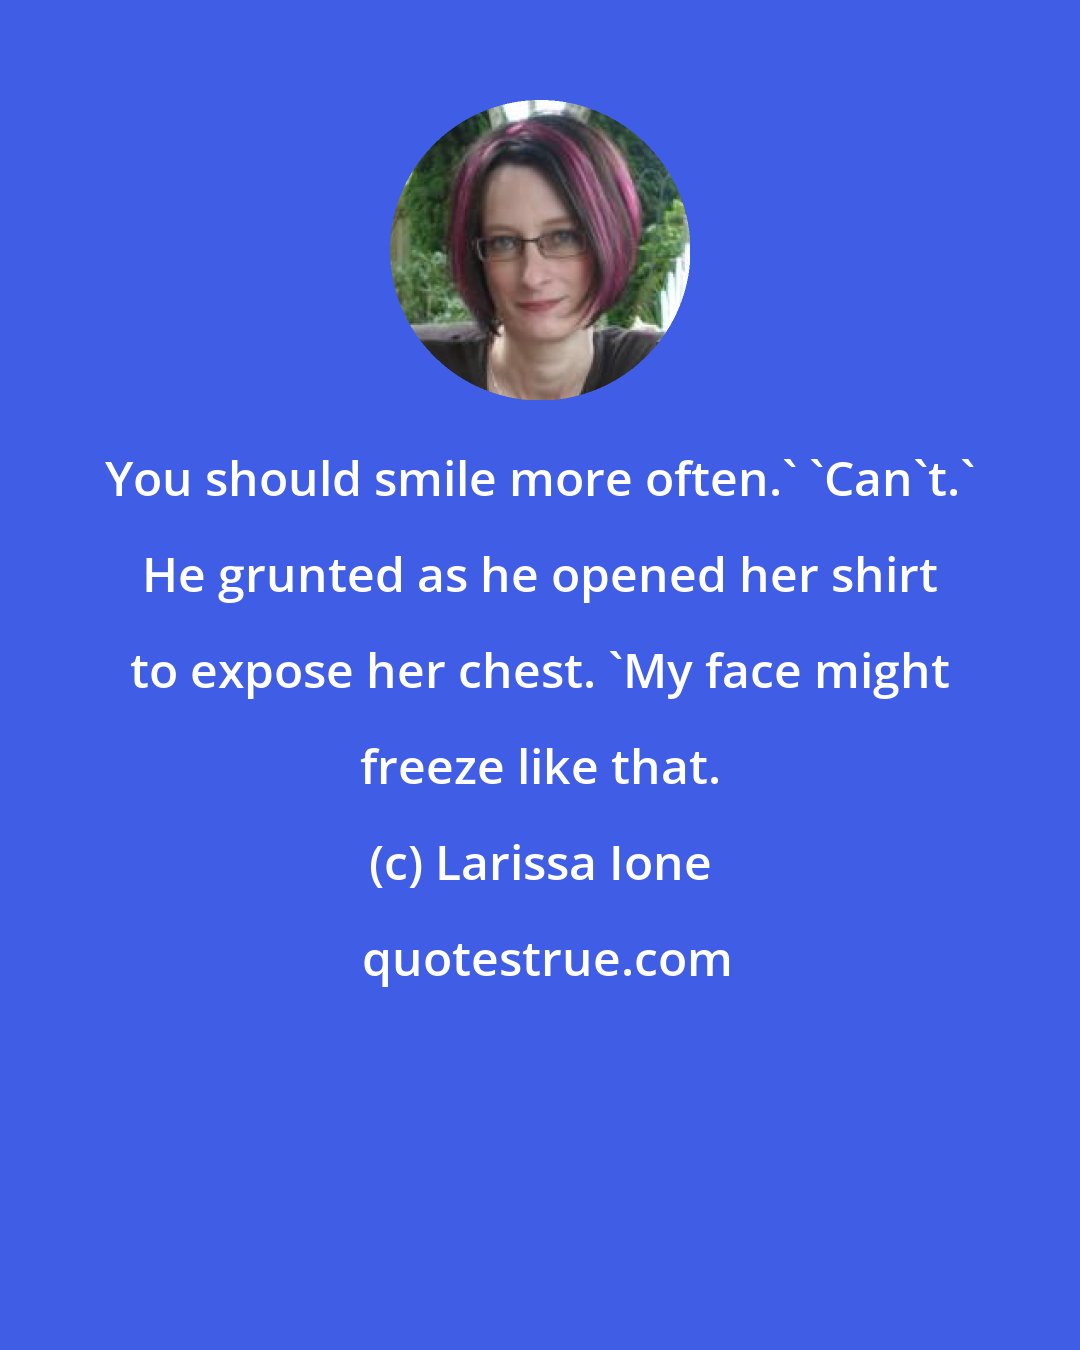 Larissa Ione: You should smile more often.' 'Can't.' He grunted as he opened her shirt to expose her chest. 'My face might freeze like that.